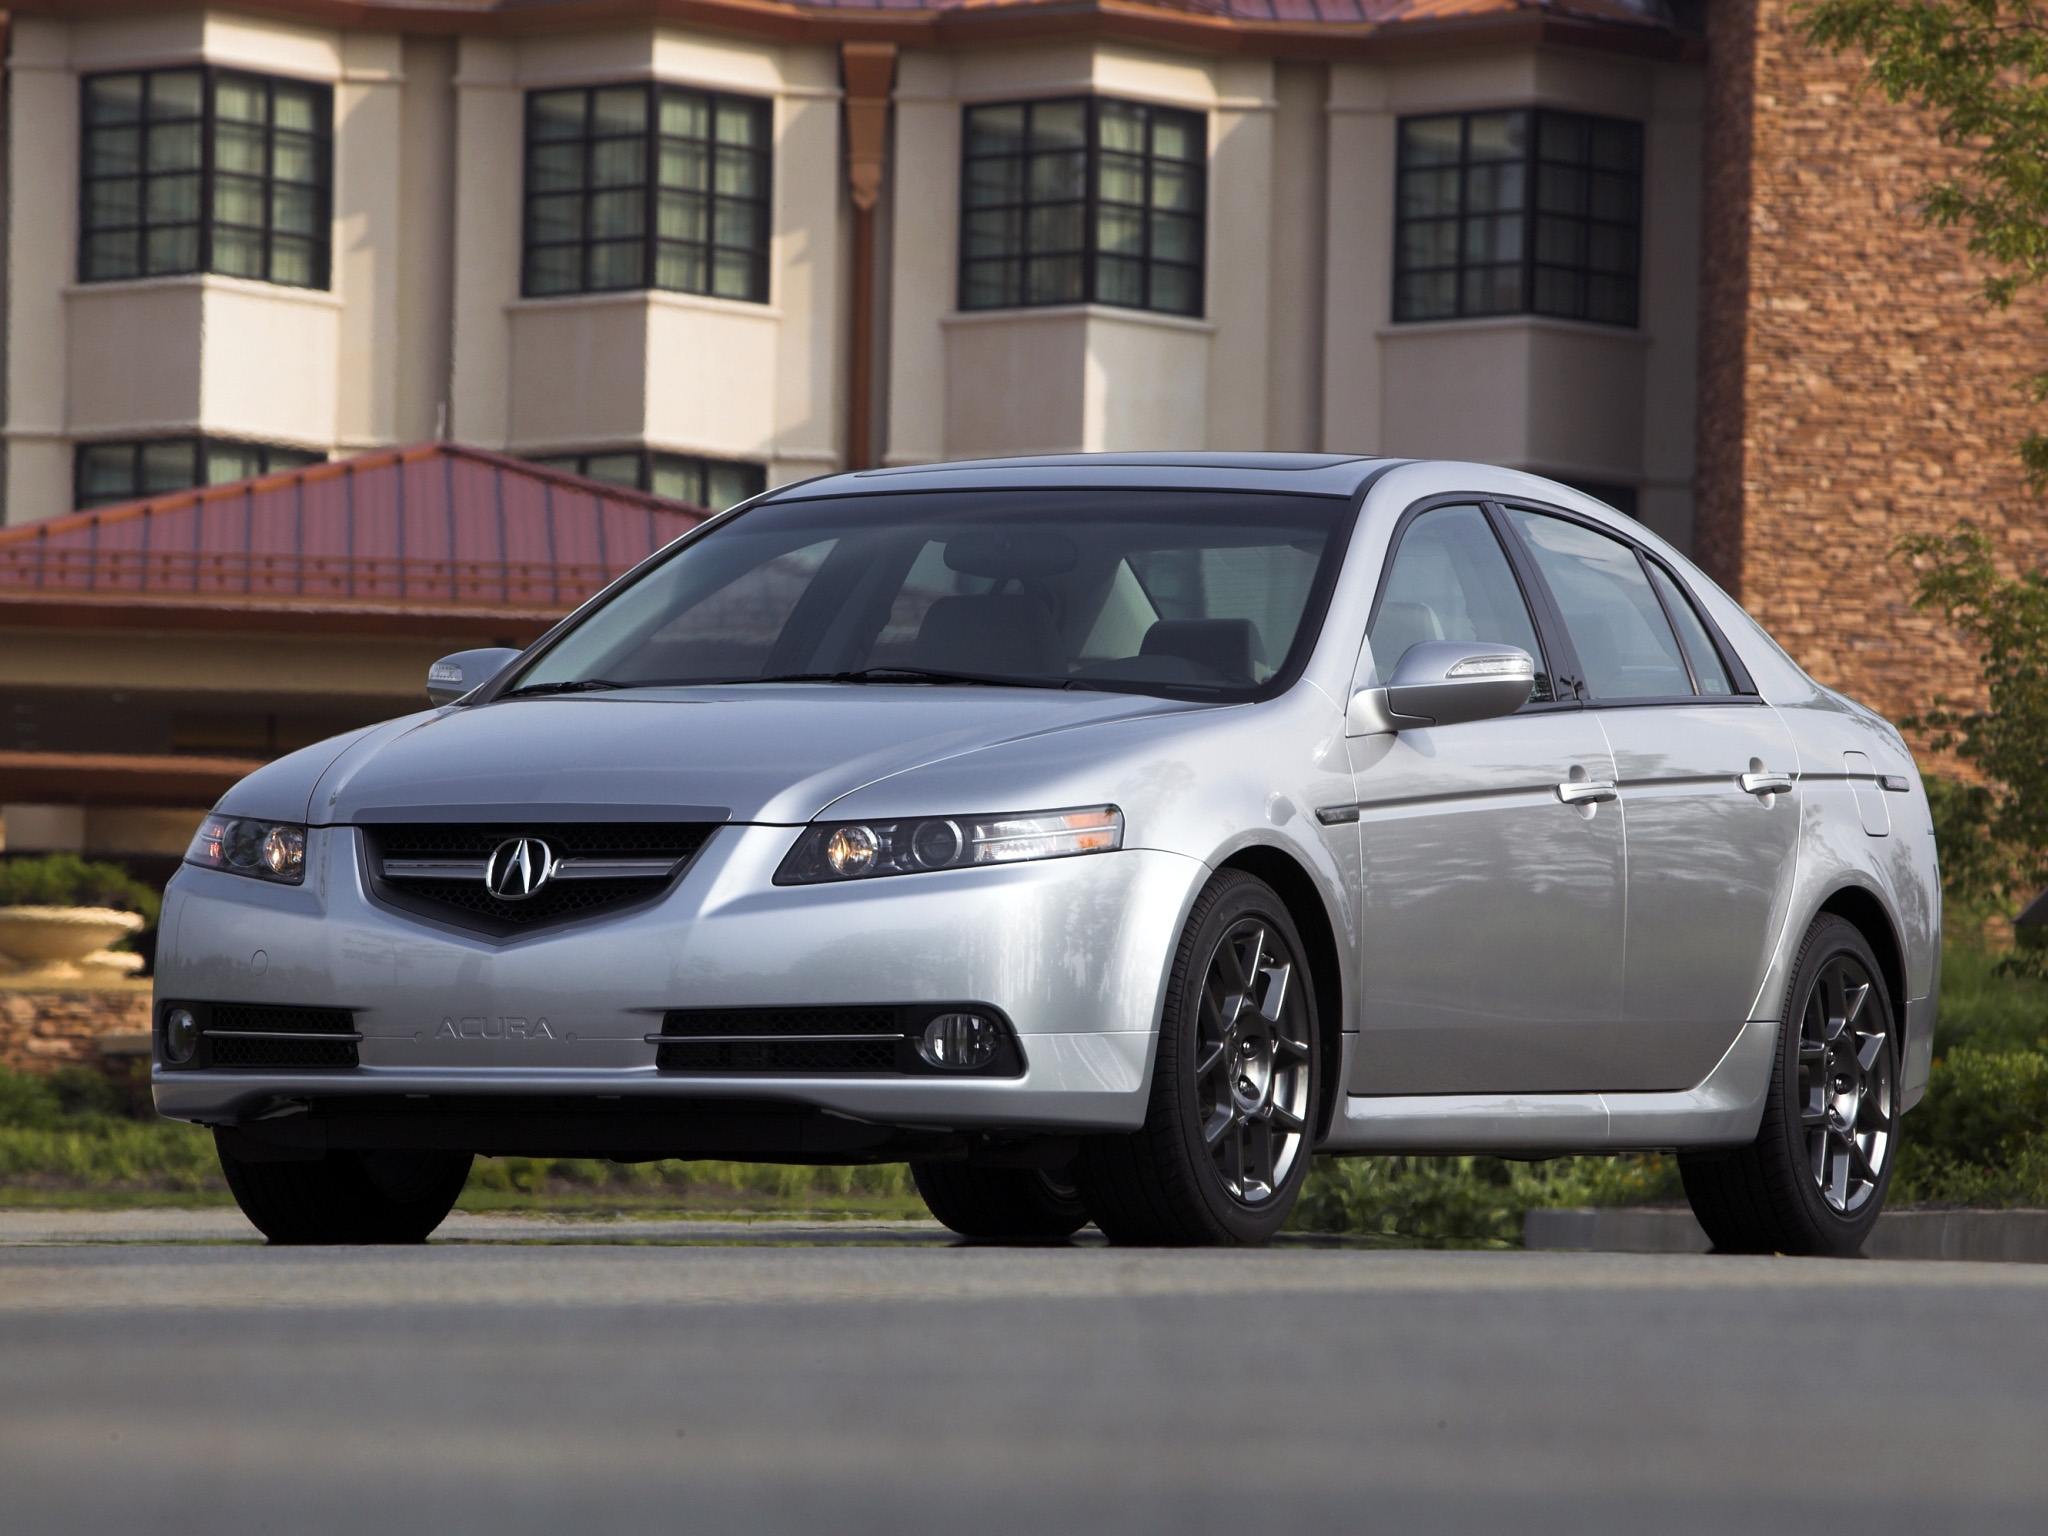 front view, auto, grass, acura, cars, building, style, tl, 2007, silver metallic Full HD